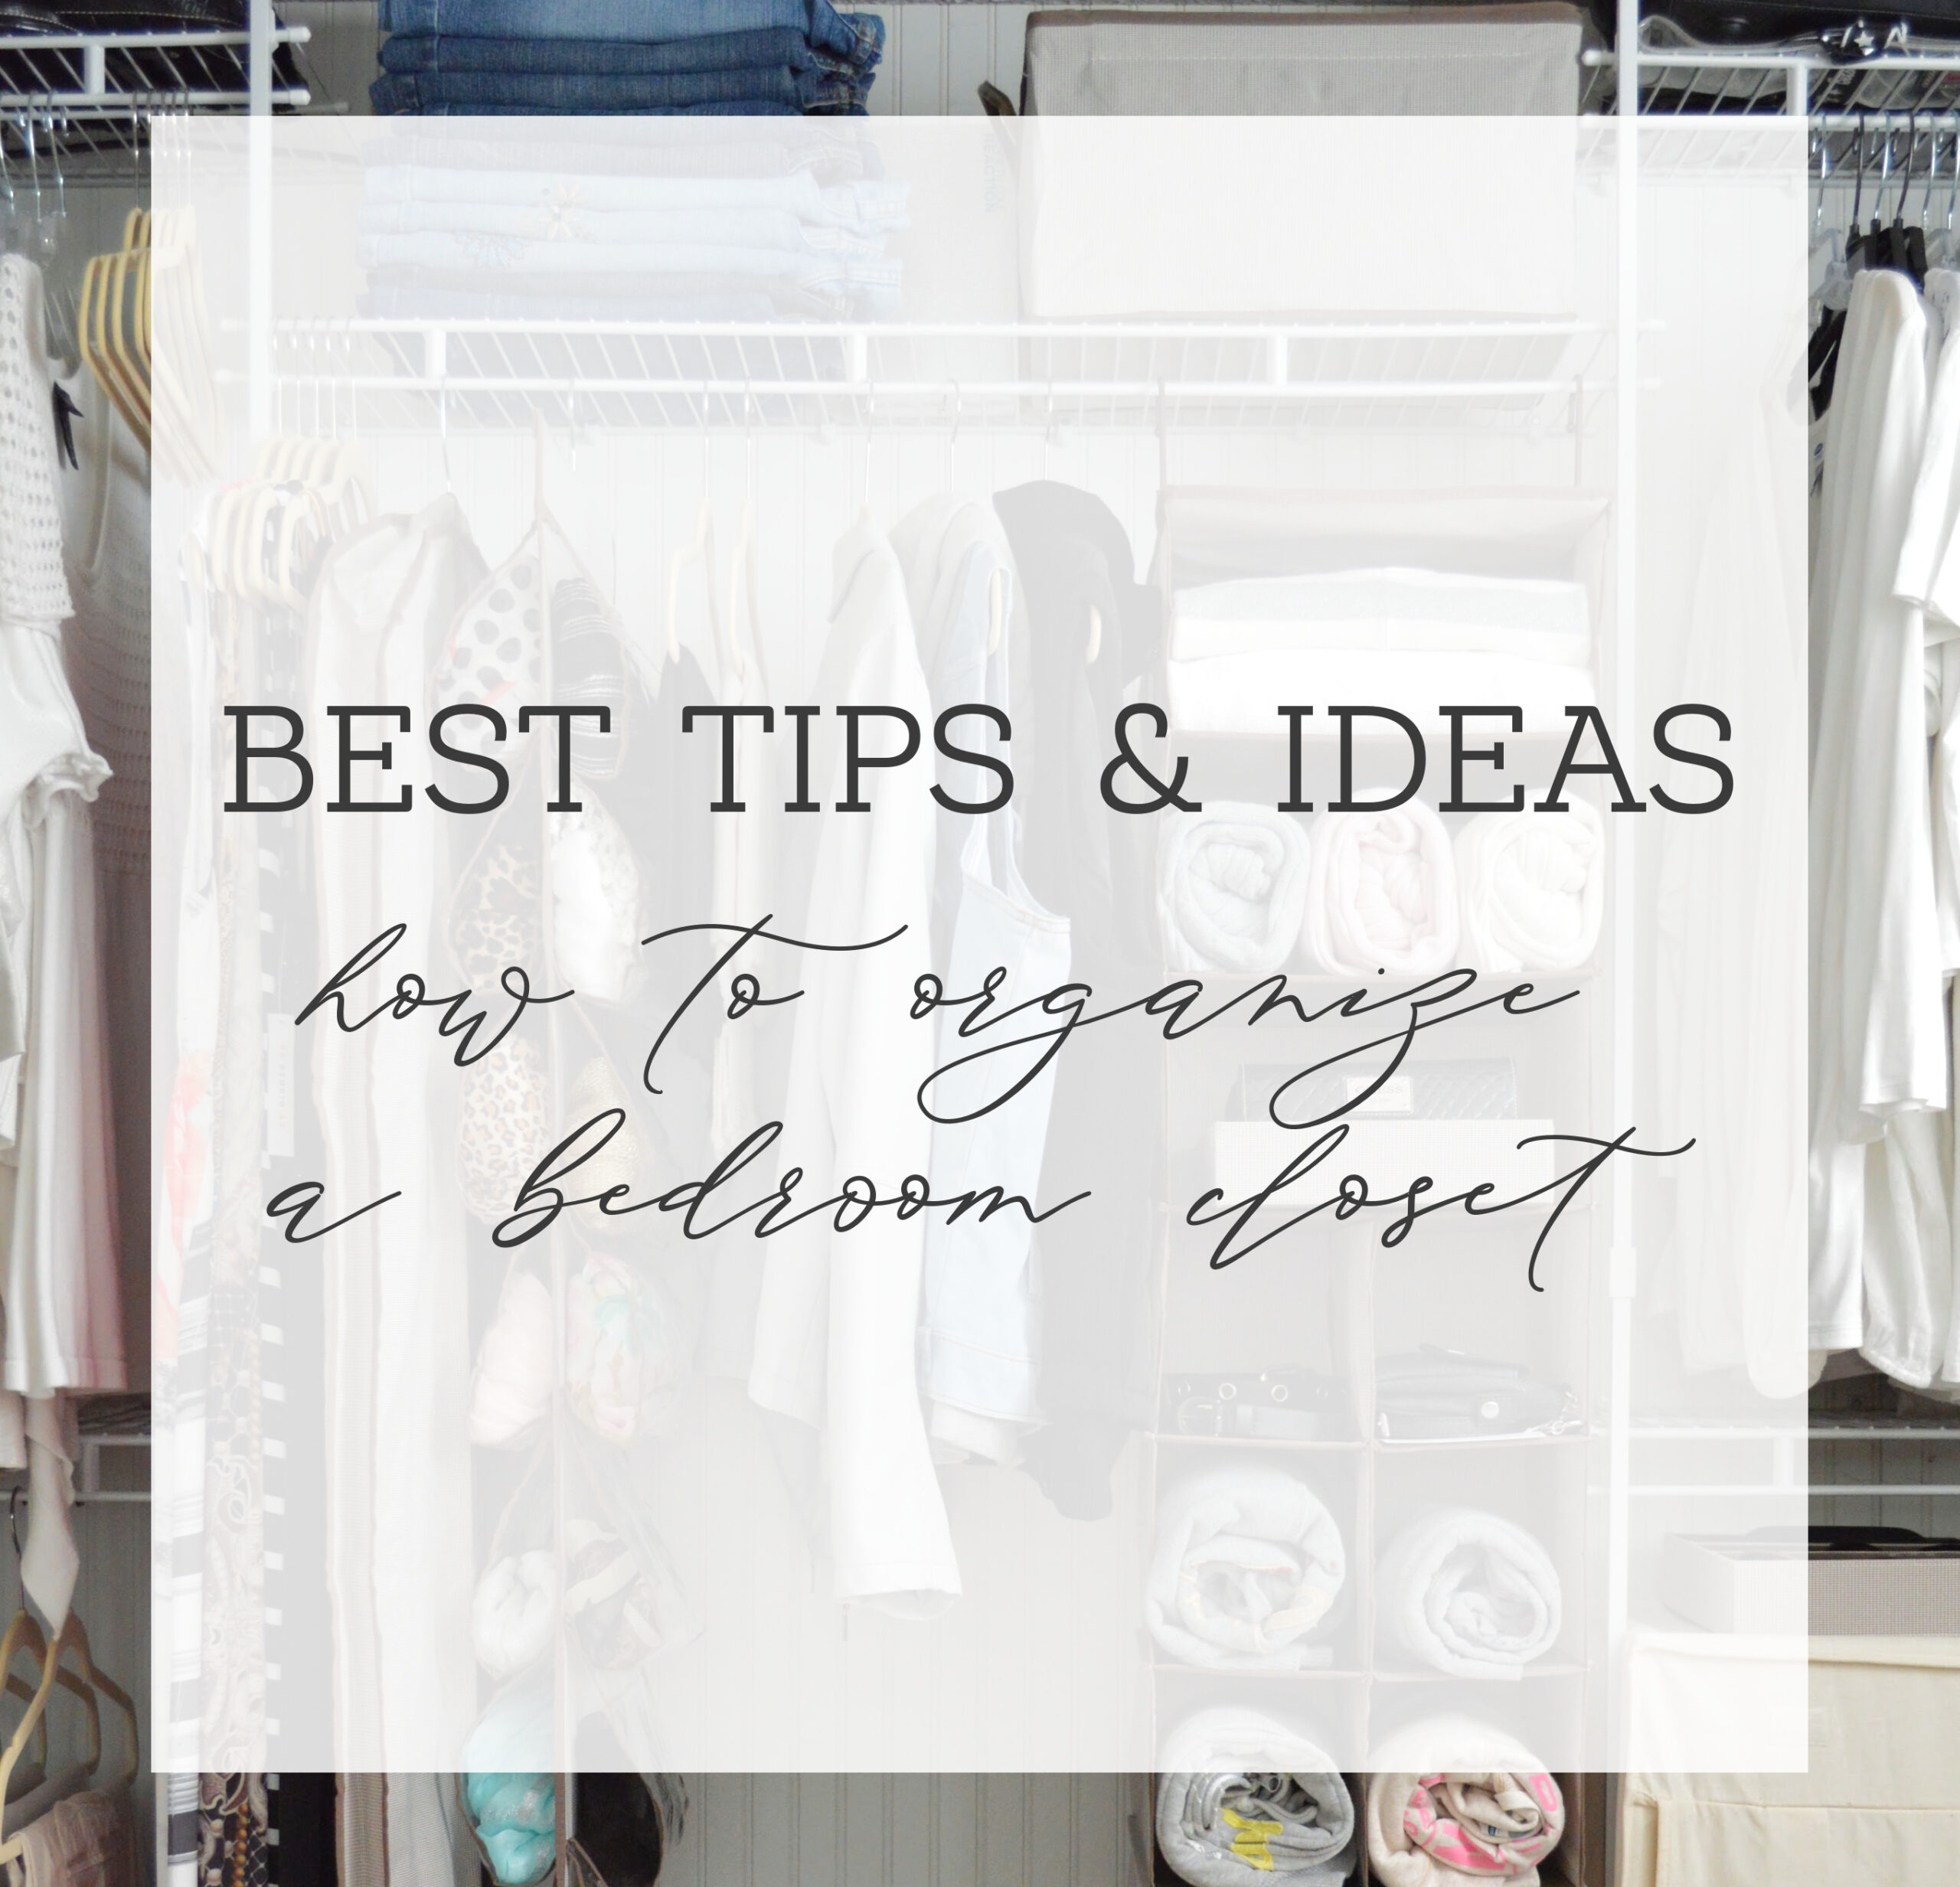 https://foxhollowcottage.com/wp-content/uploads/2021/01/best-tips-and-ideas-how-to-organize-a-bedroom-closet-scaled.jpg